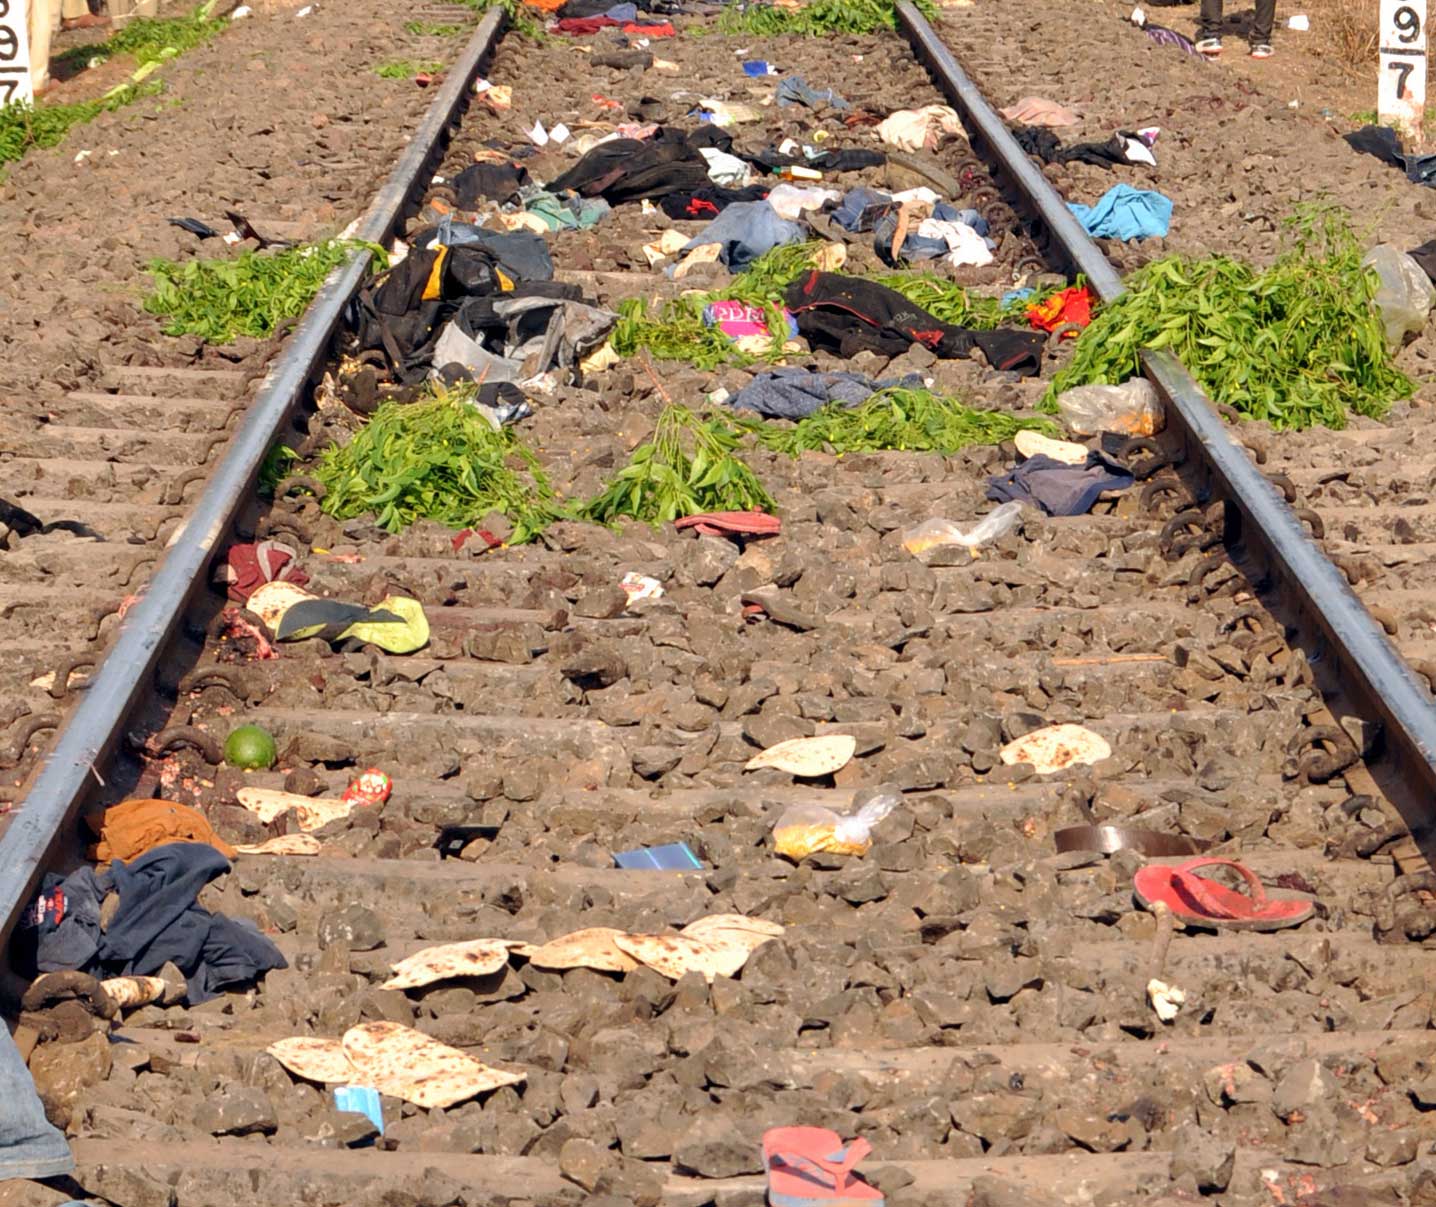 Rotis lie on the tracks in Aurangabad where the 16 workers were killed.